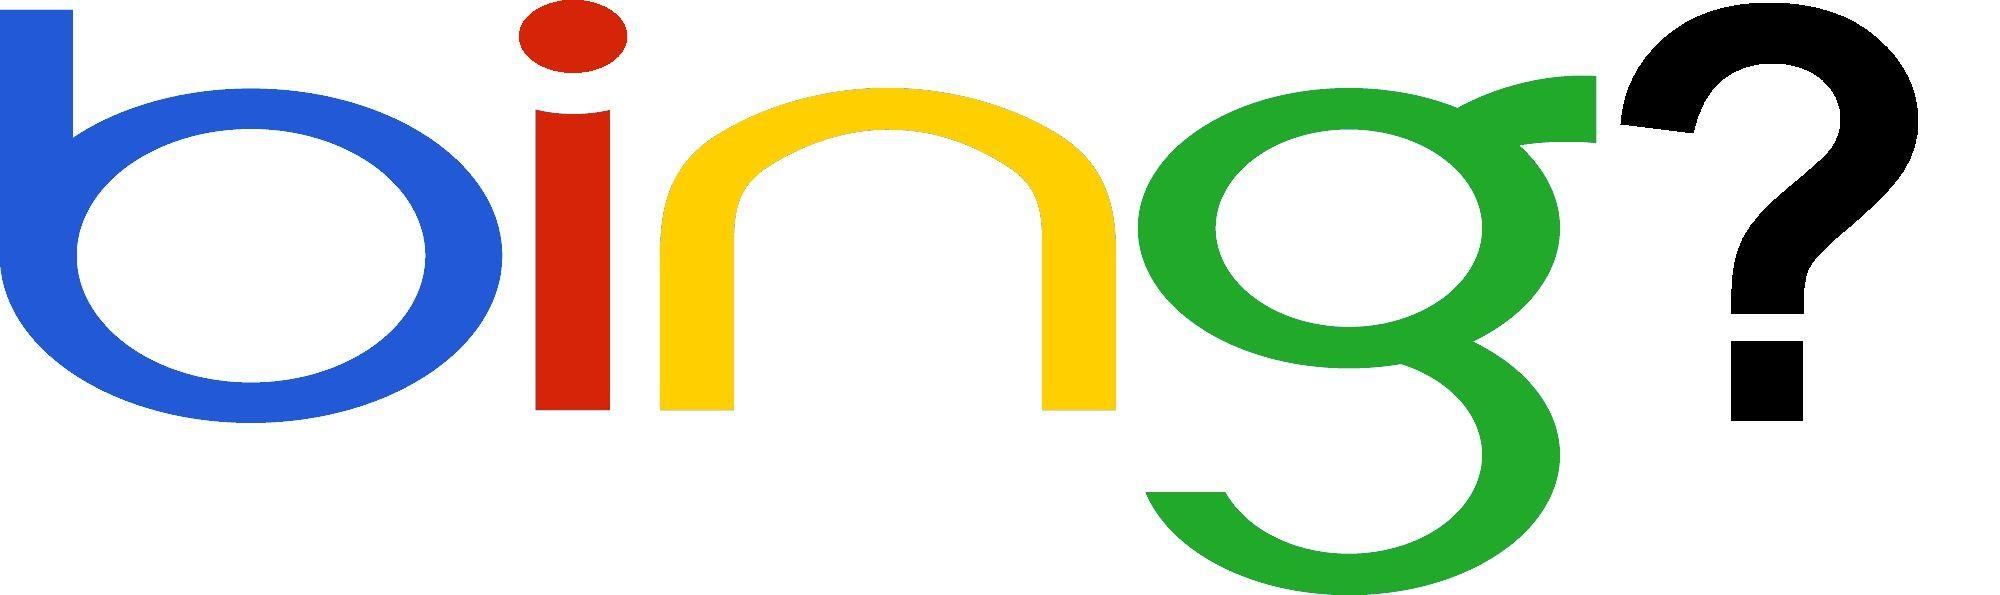 Bing First Logo - Bing Logo With Google Colors Question Mark